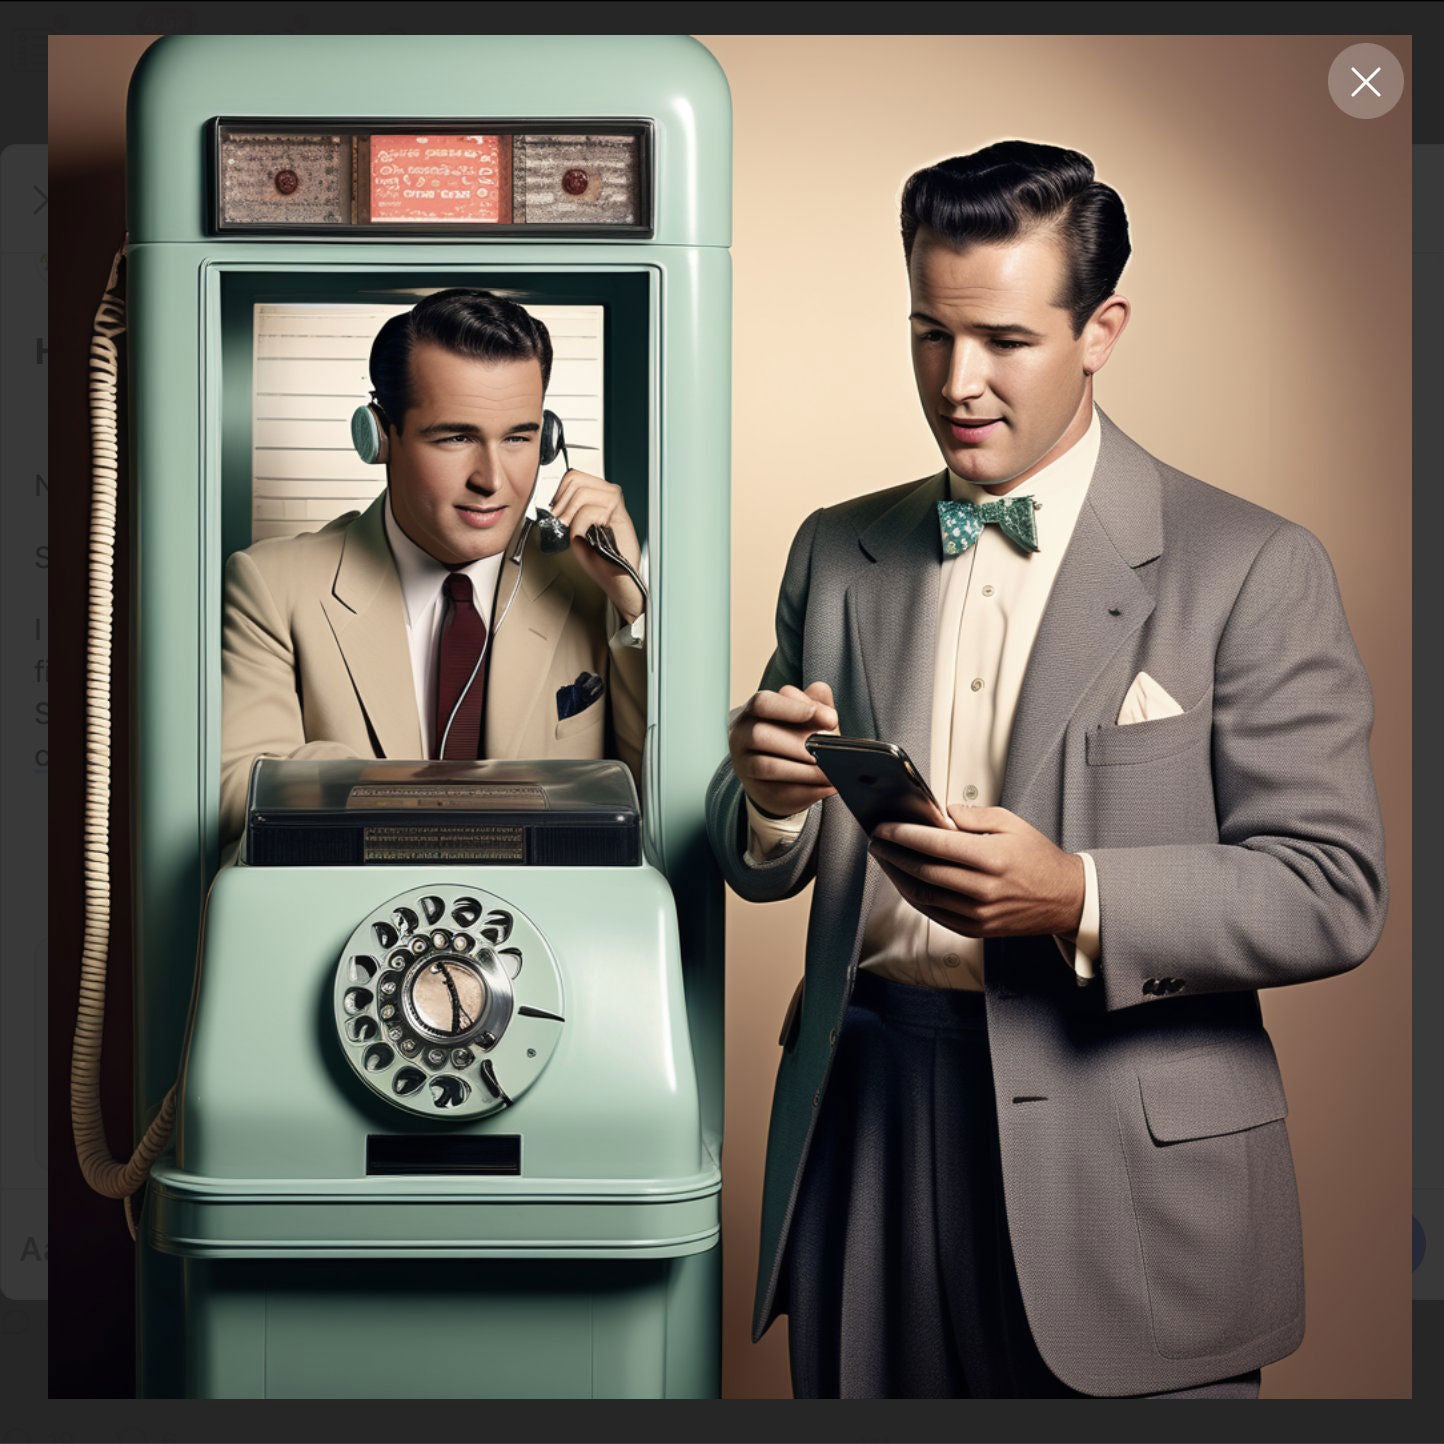 A nonsensical A.I.–generated image of an old-timey, 1950s-era teal pay phone with an operator inside it. Standing outside the phone is a man dressed in a gray 1950s-style suit. He holds a smartphone.